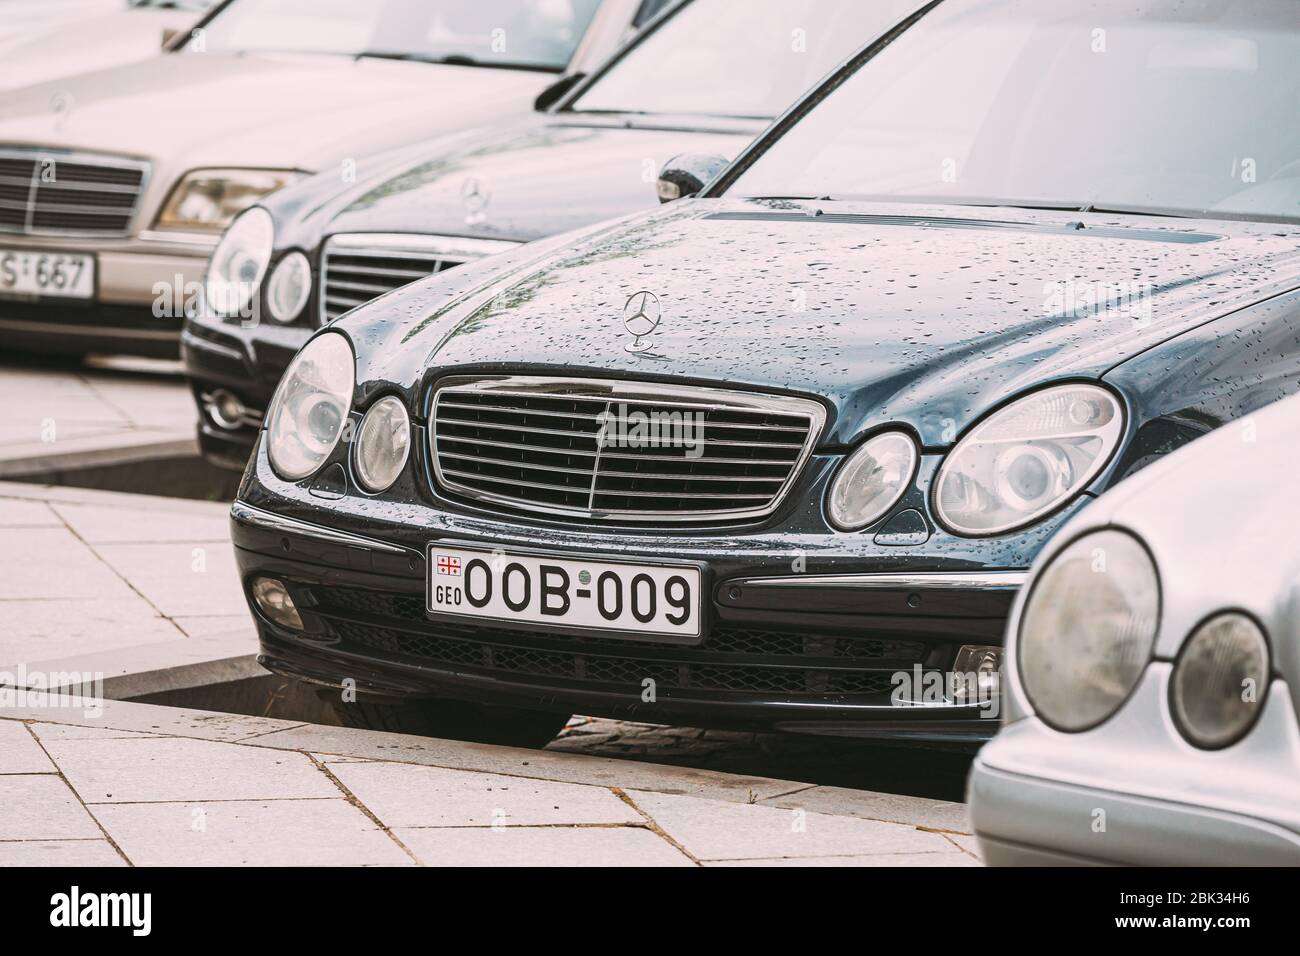 Batumi, Georgia - May 27, 2016: Different Cars Mercedes-Benz E-Class W210 And W211 Parked In Row In Street on Summer Day. Stock Photo